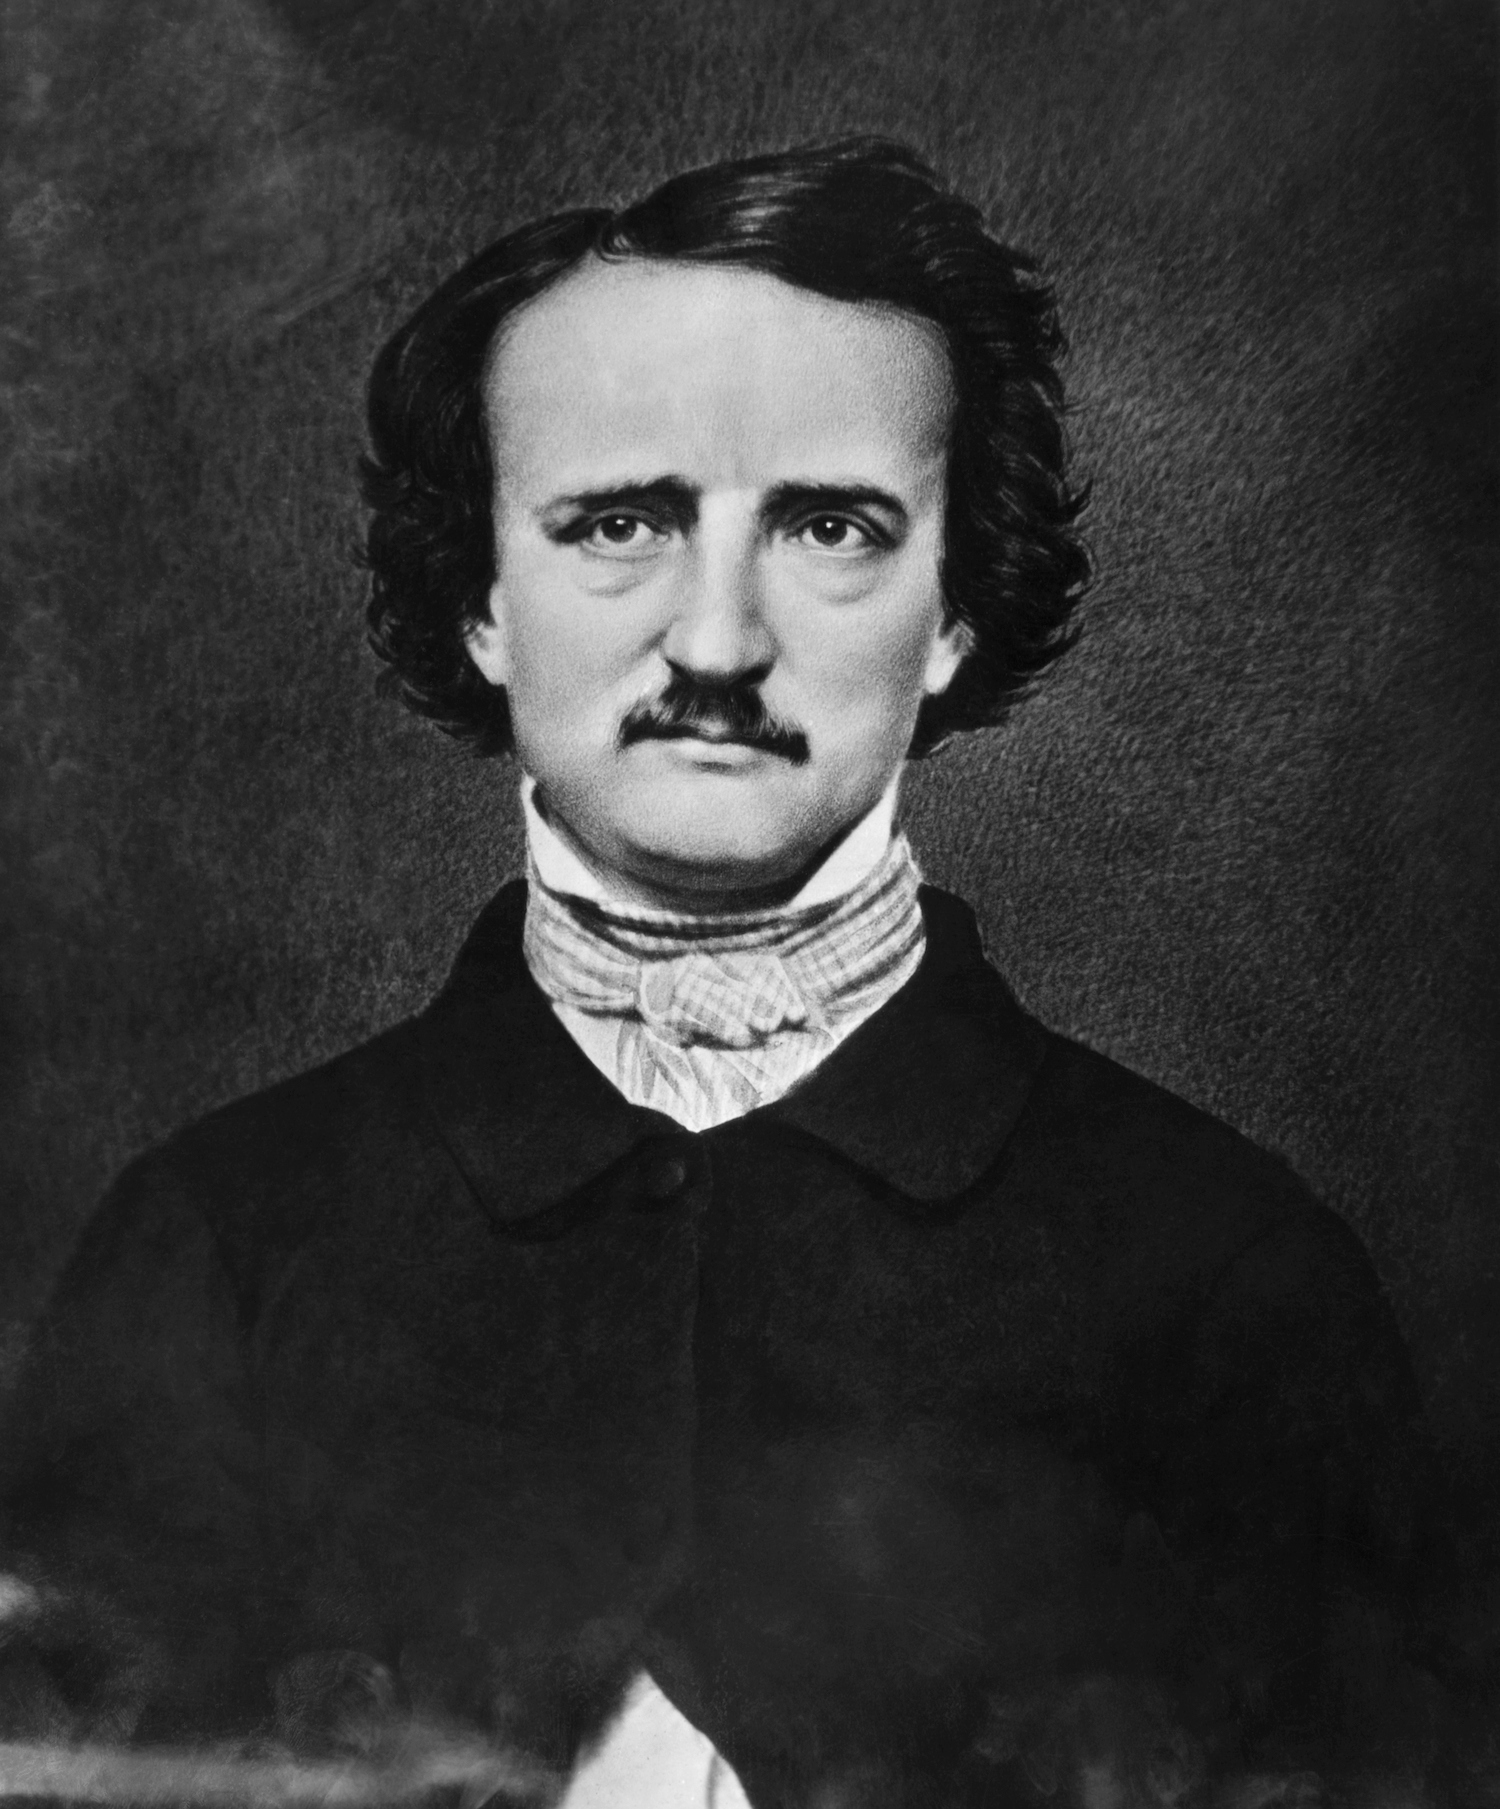 Fall of the House of Usher author Edgar Allan Poe portrait